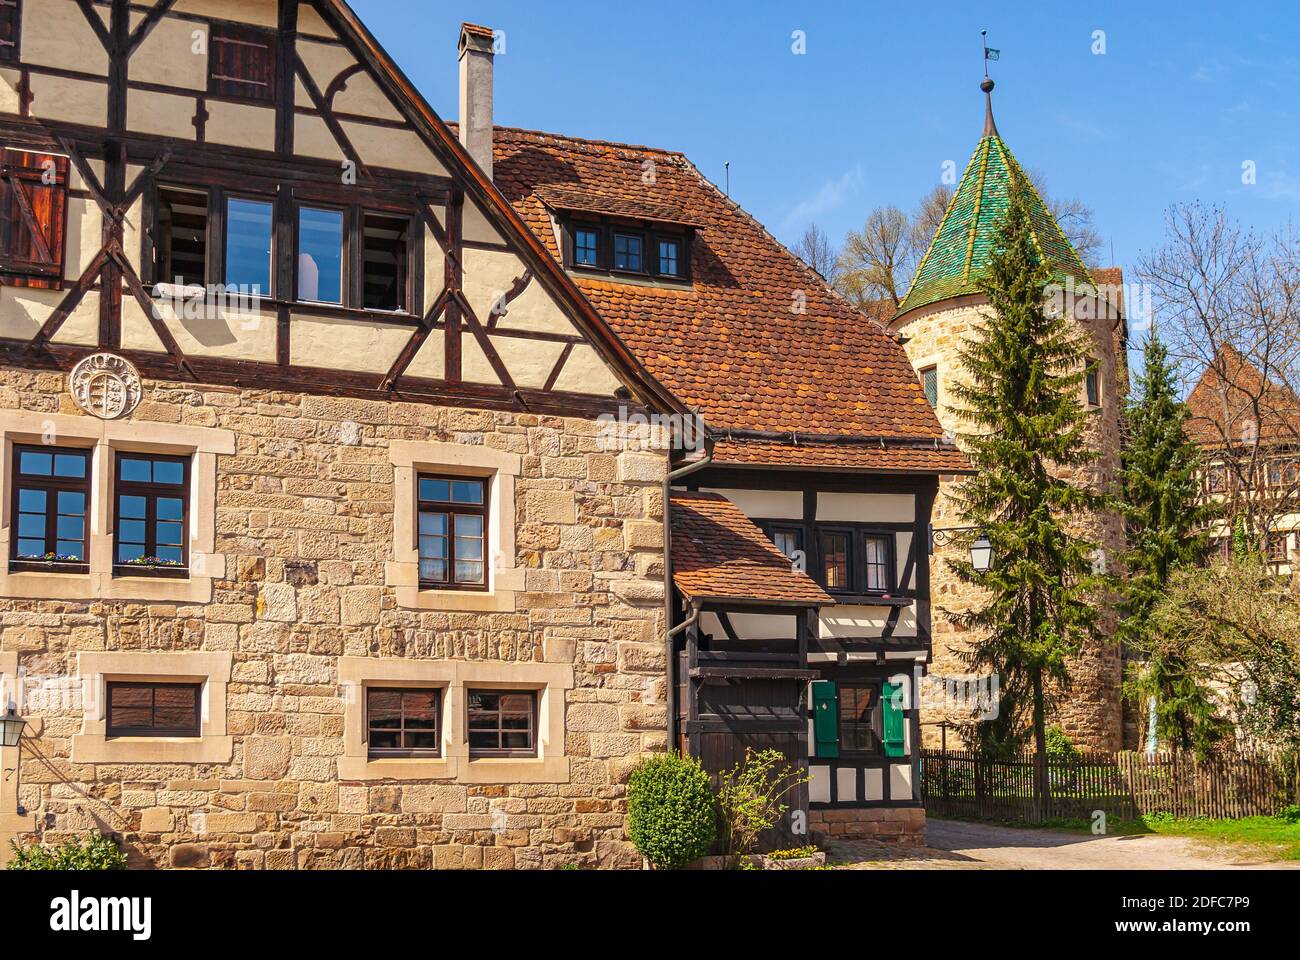 Impressions of the village and the palace and monastery complex of Bebenhausen near Tübingen, Baden-Württemberg, Germany. Stock Photo